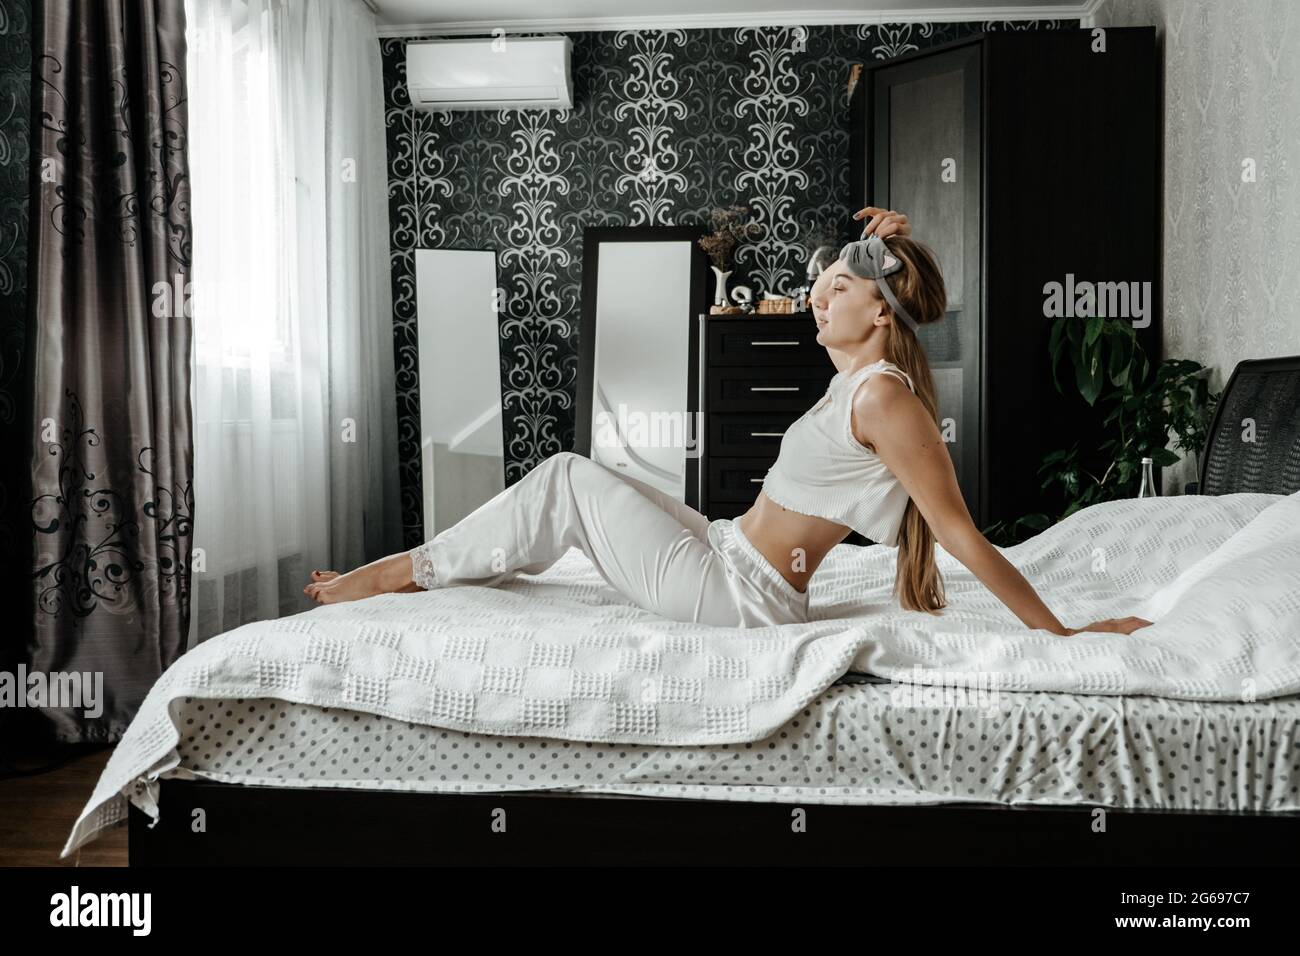 Mental health, mental wellbeing, calm, mourning routines, start day. No stress, healthy habit, concept. Young woman in pajamas waking up in morning Stock Photo